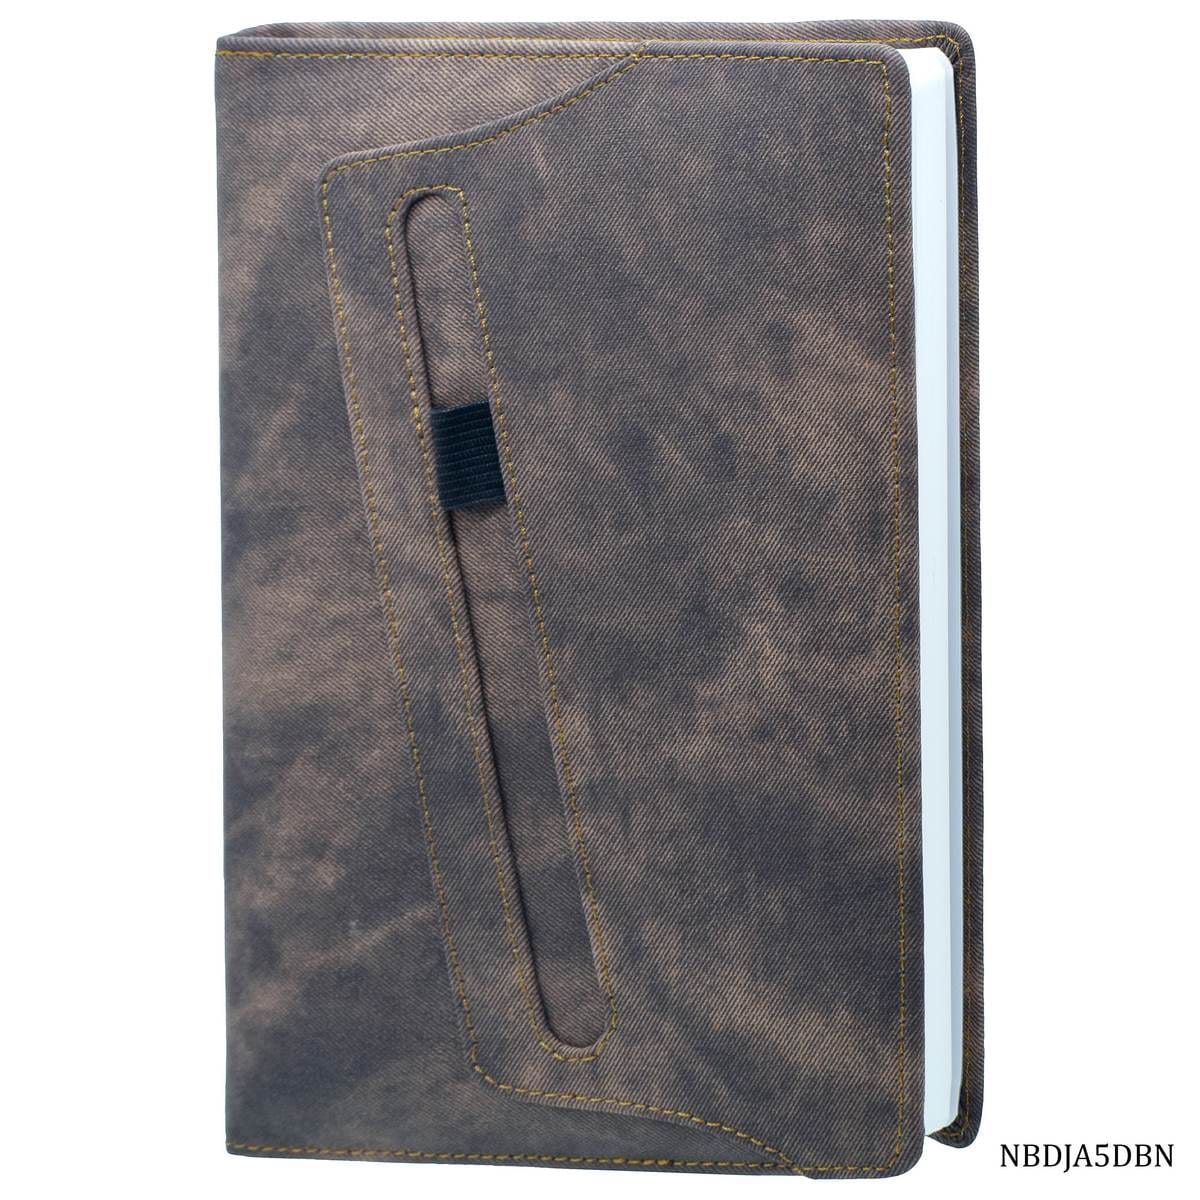 jags-mumbai Notebooks & Diaries Note book Diary A5 Jeans Cloth DarkBrown